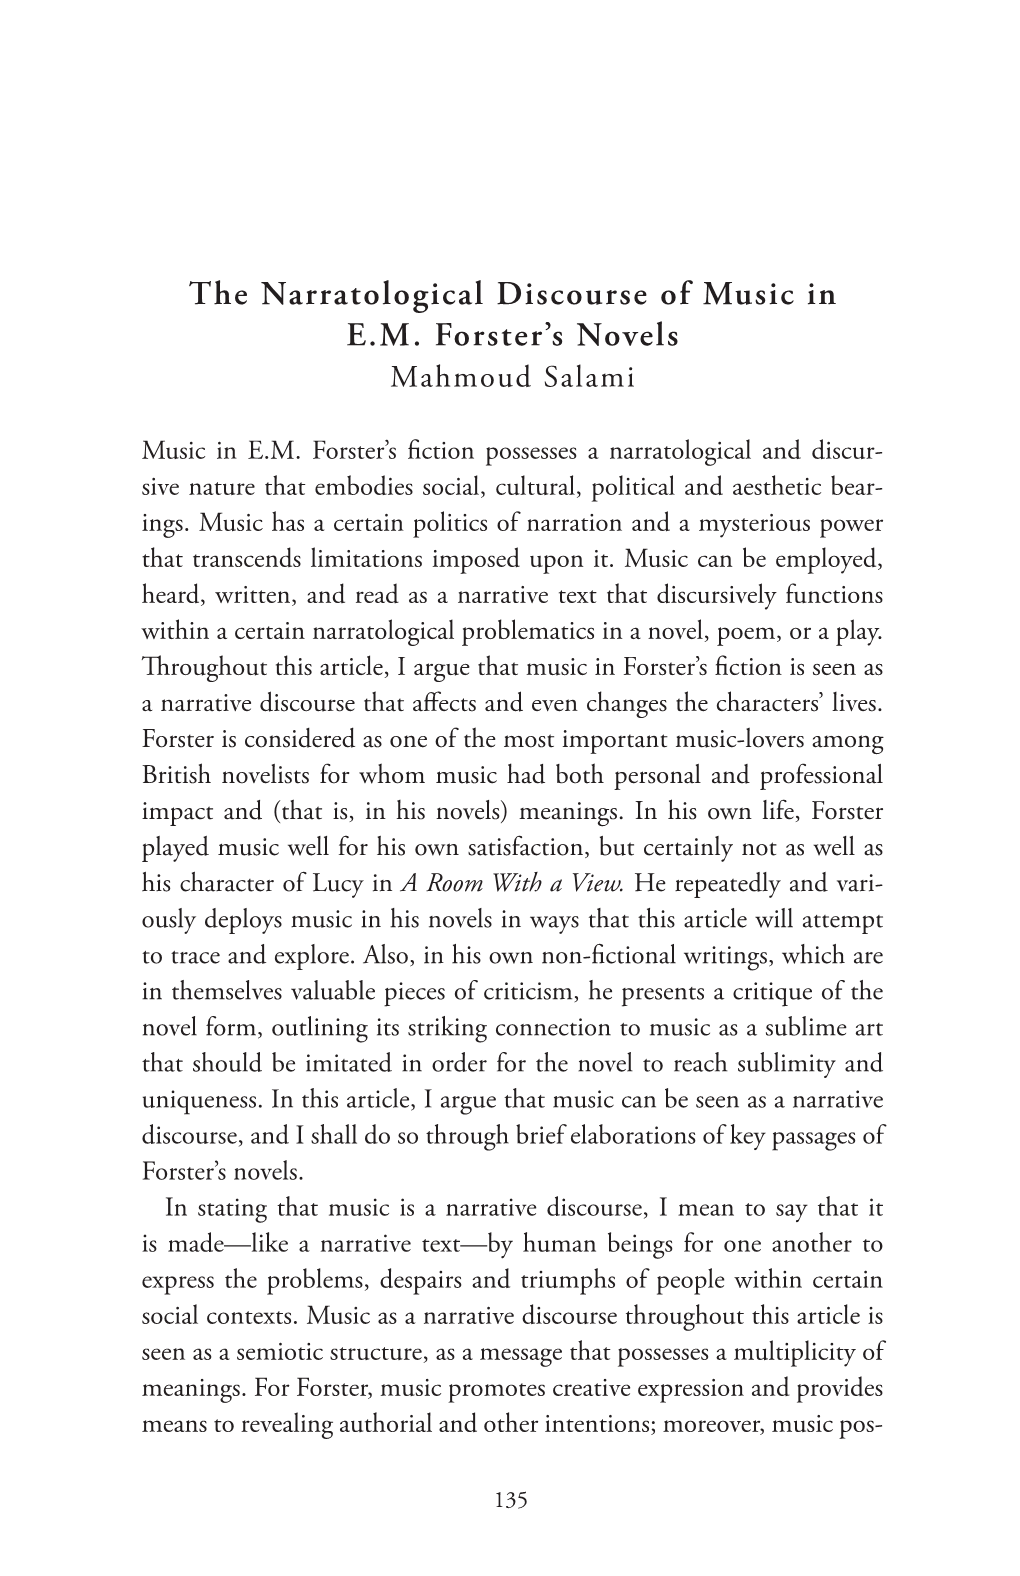 The Narratological Discourse of Music in E.M. Forster's Novels